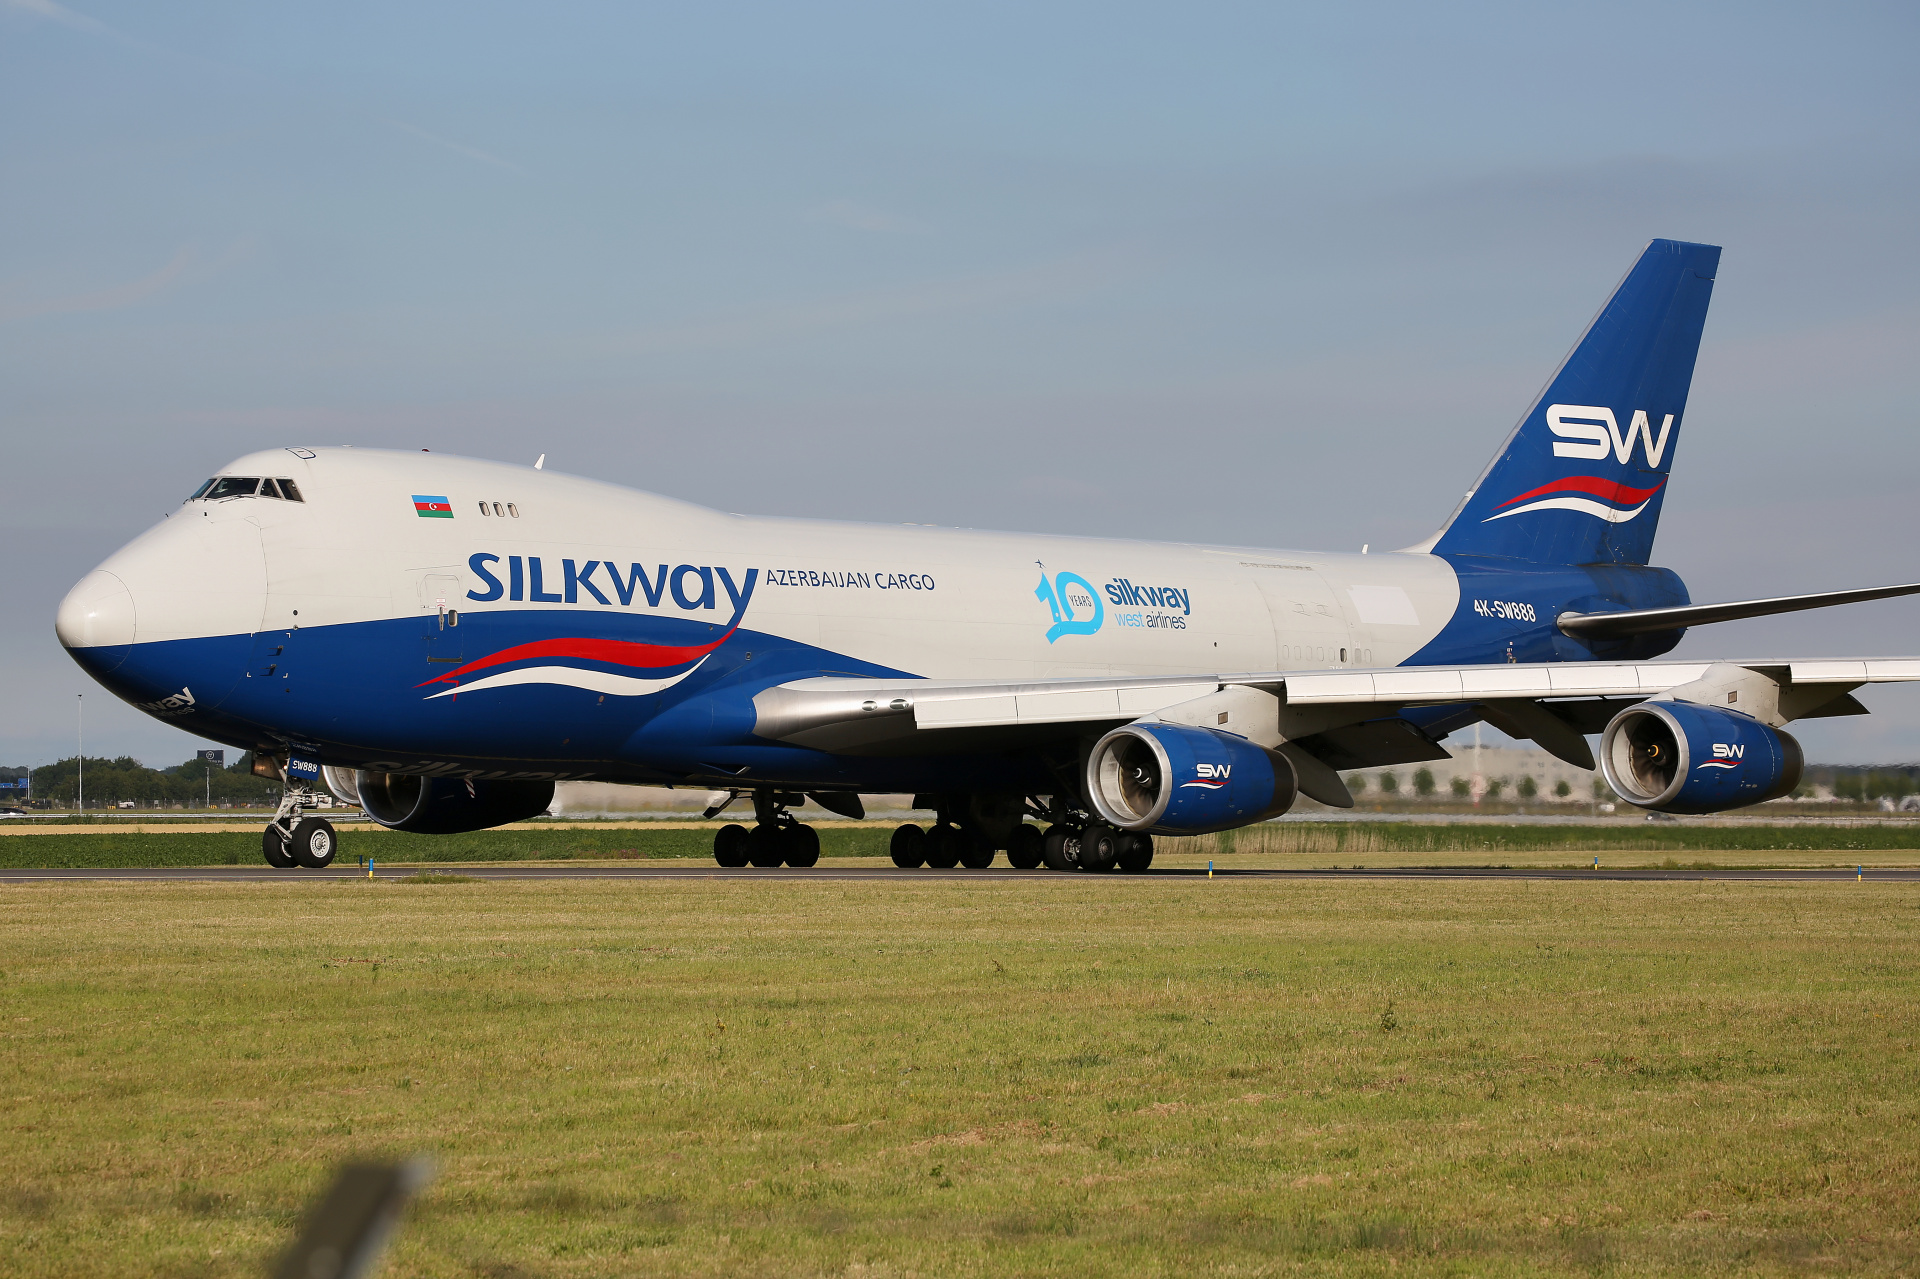 4K-SW888, Silk Way West Airlines (10 years sticker) (Aircraft » Schiphol Spotting » Boeing 747-400F)